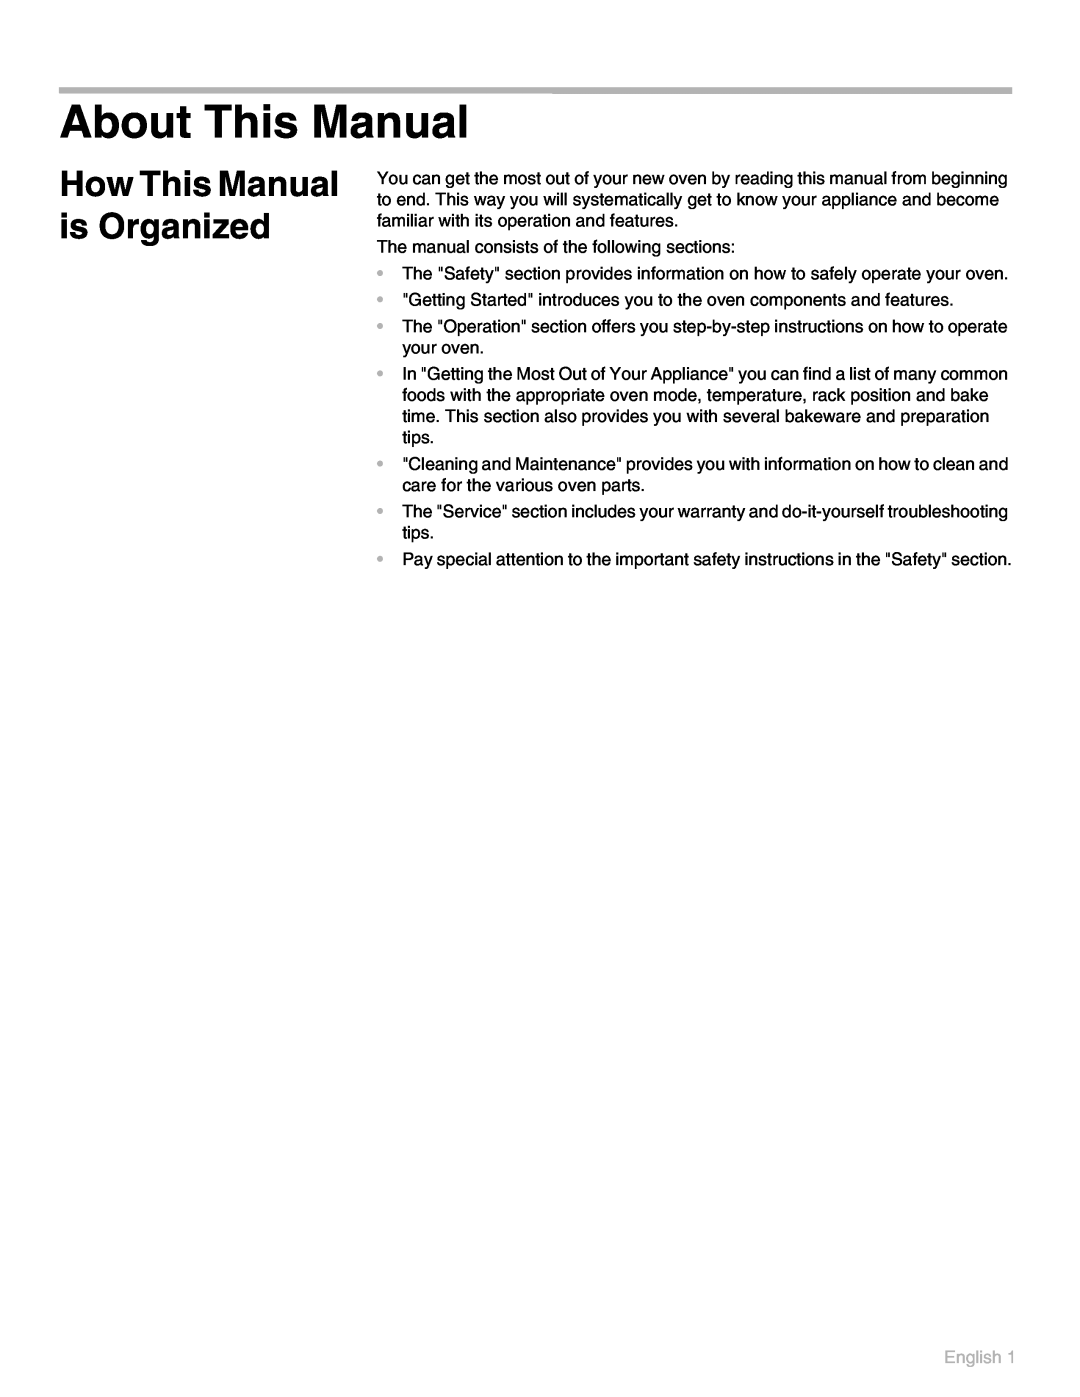 Thermador POD302 manual About This Manual, How This Manual is Organized, English 